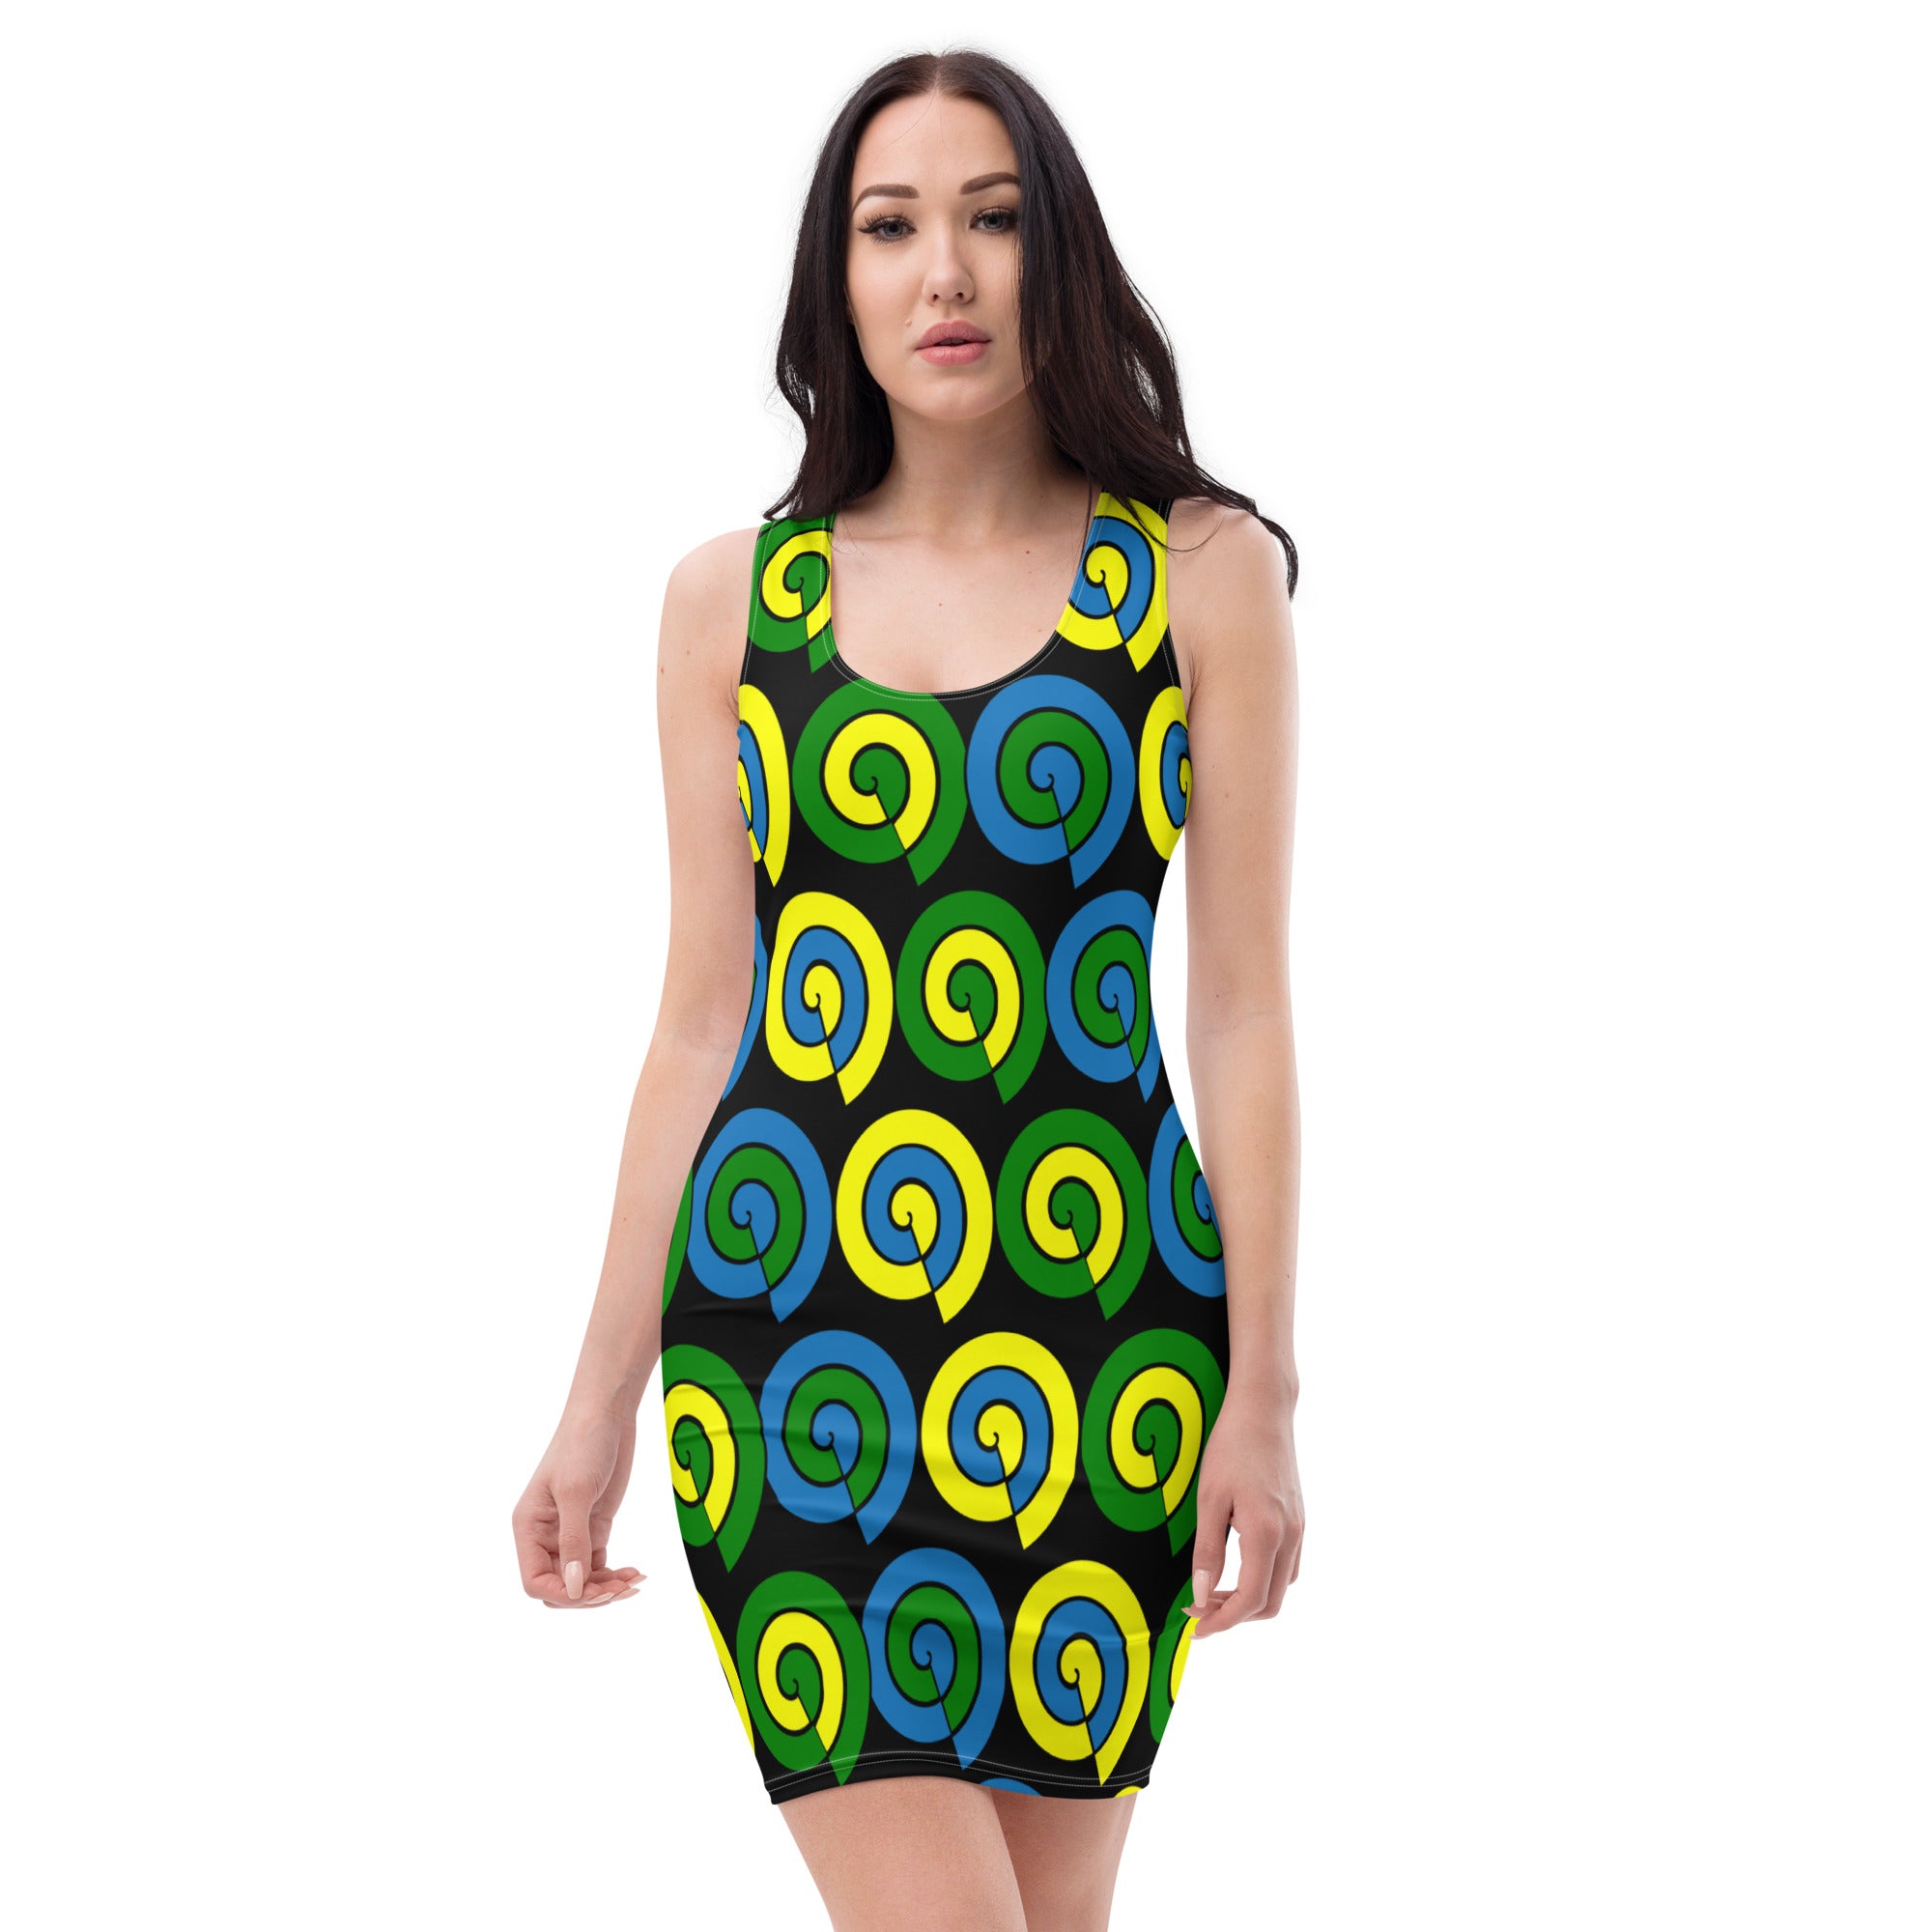 St. Vincent and the Grenadines dress with spirals in national Colors